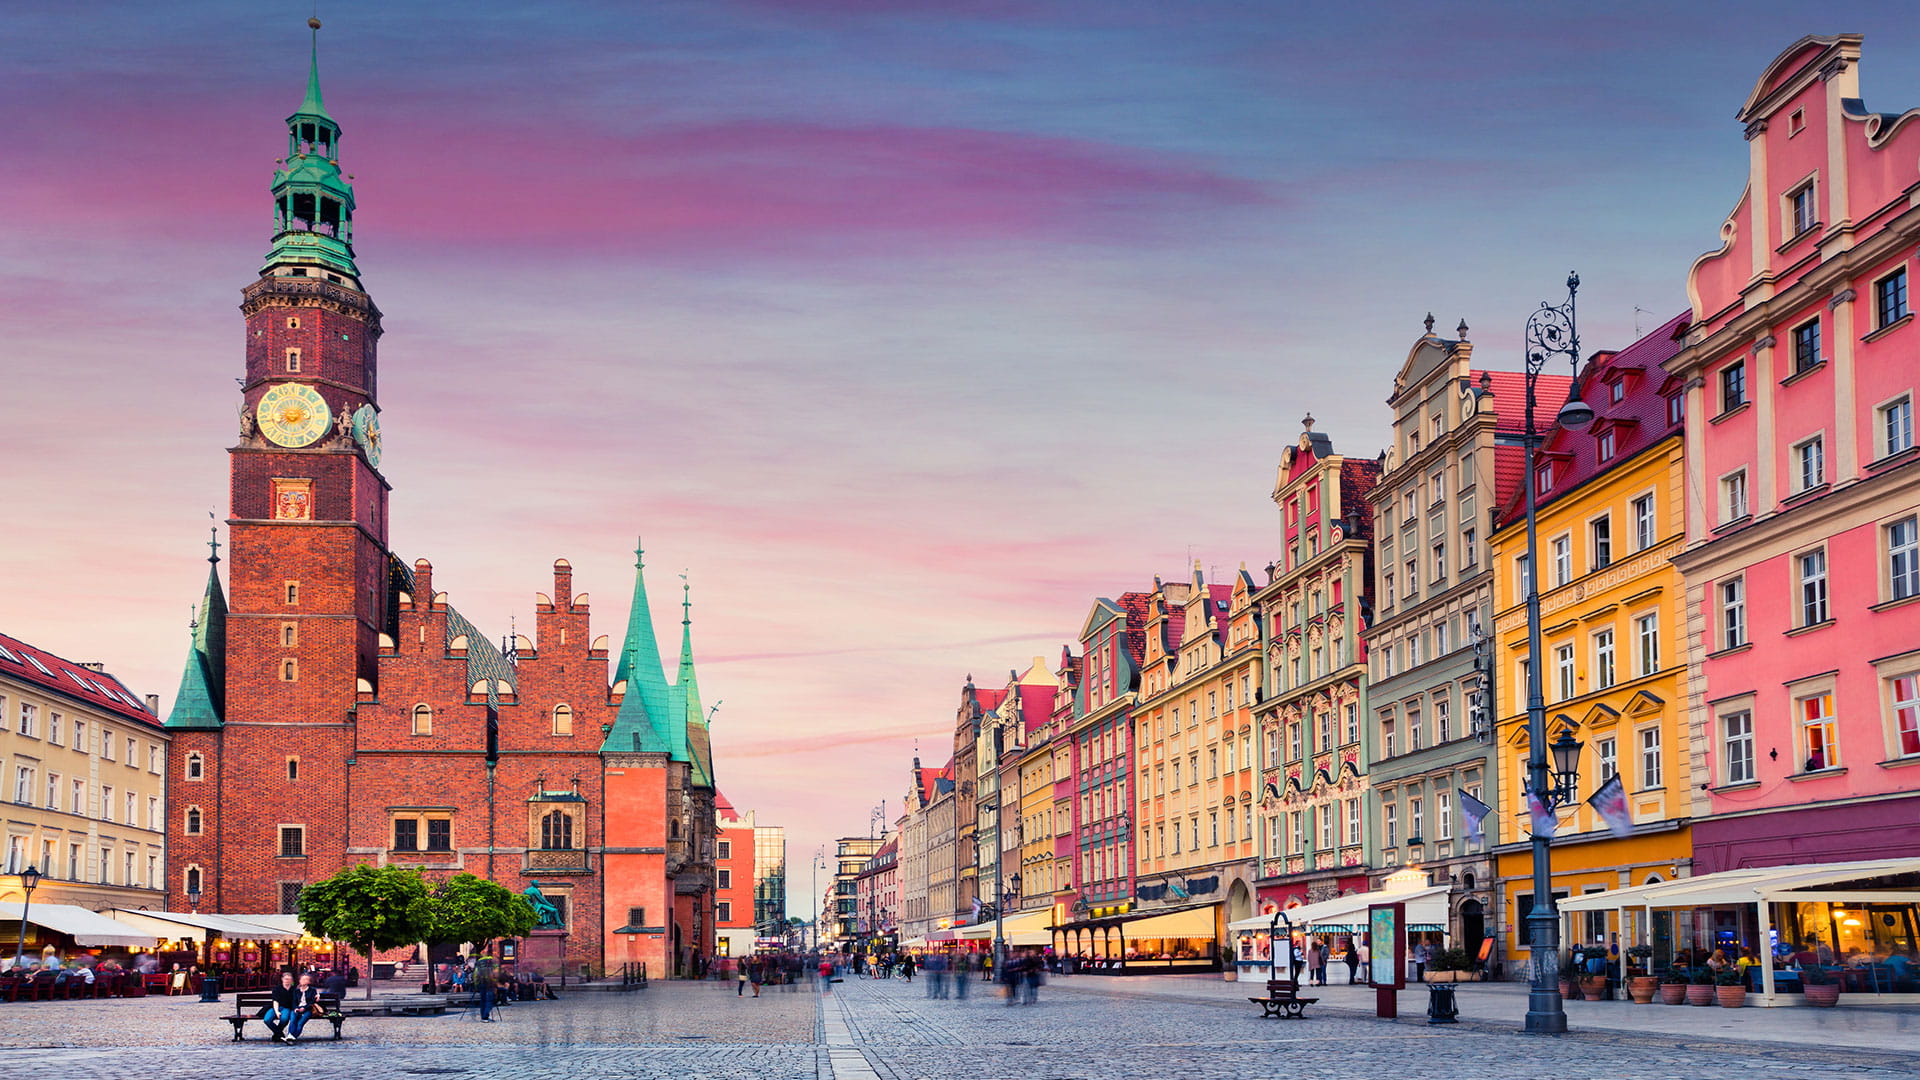 City view in Wroclaw, Poland